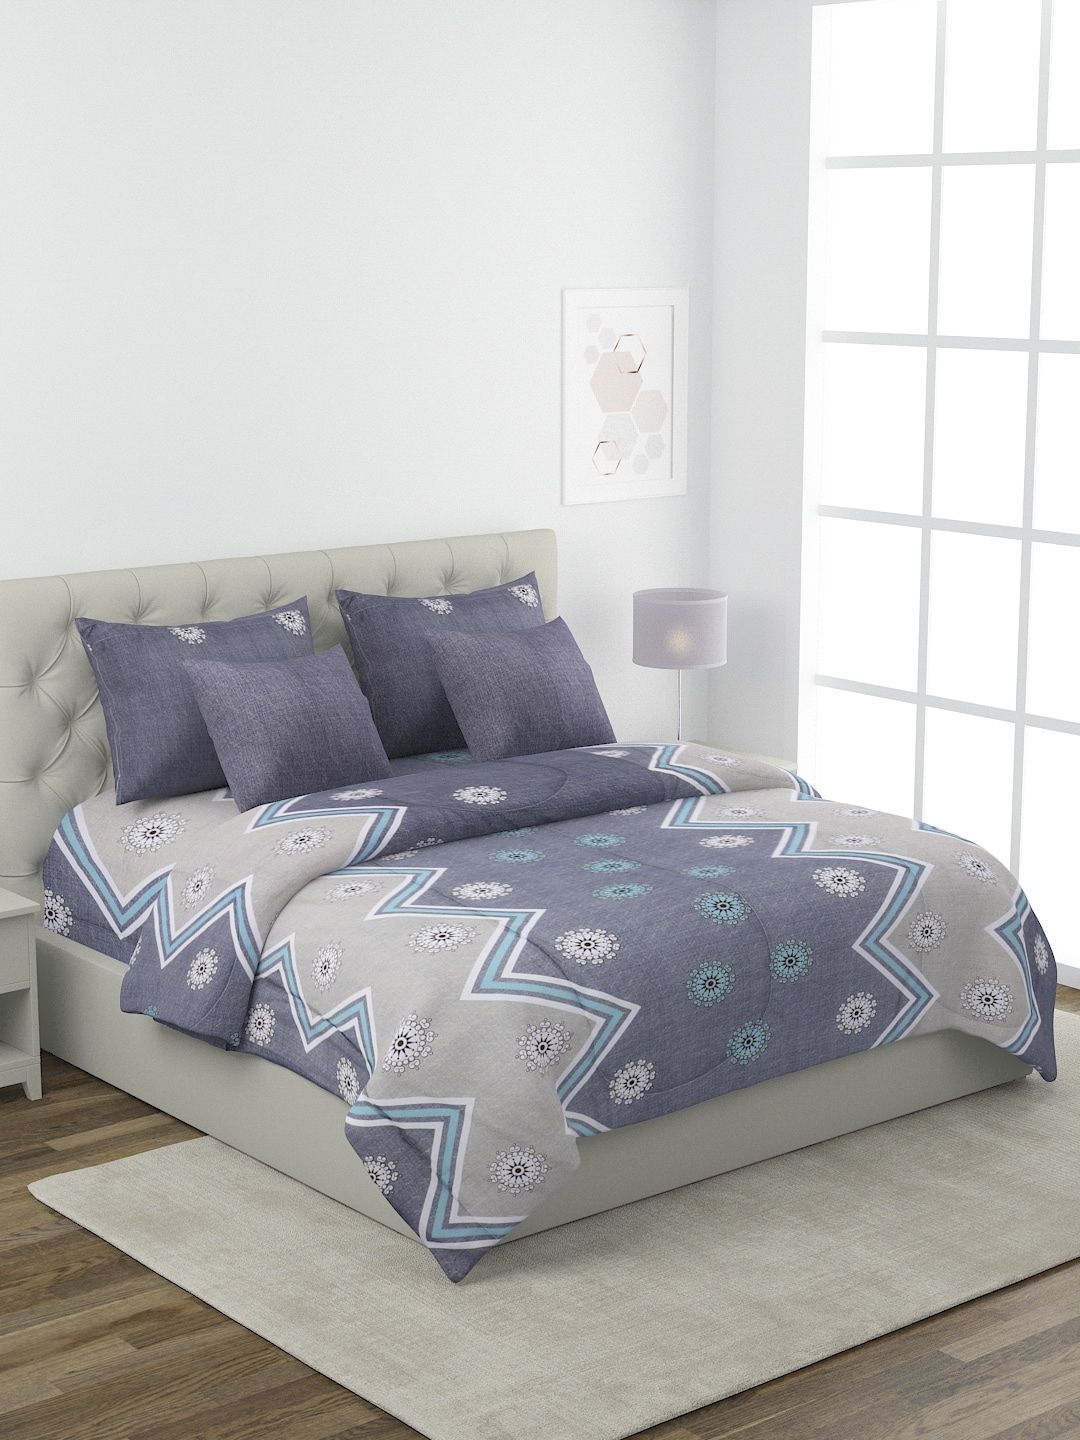 ROMEE Blue & Grey Ethnic Motifs Printed Double King Bedding Set with Comforter Price in India